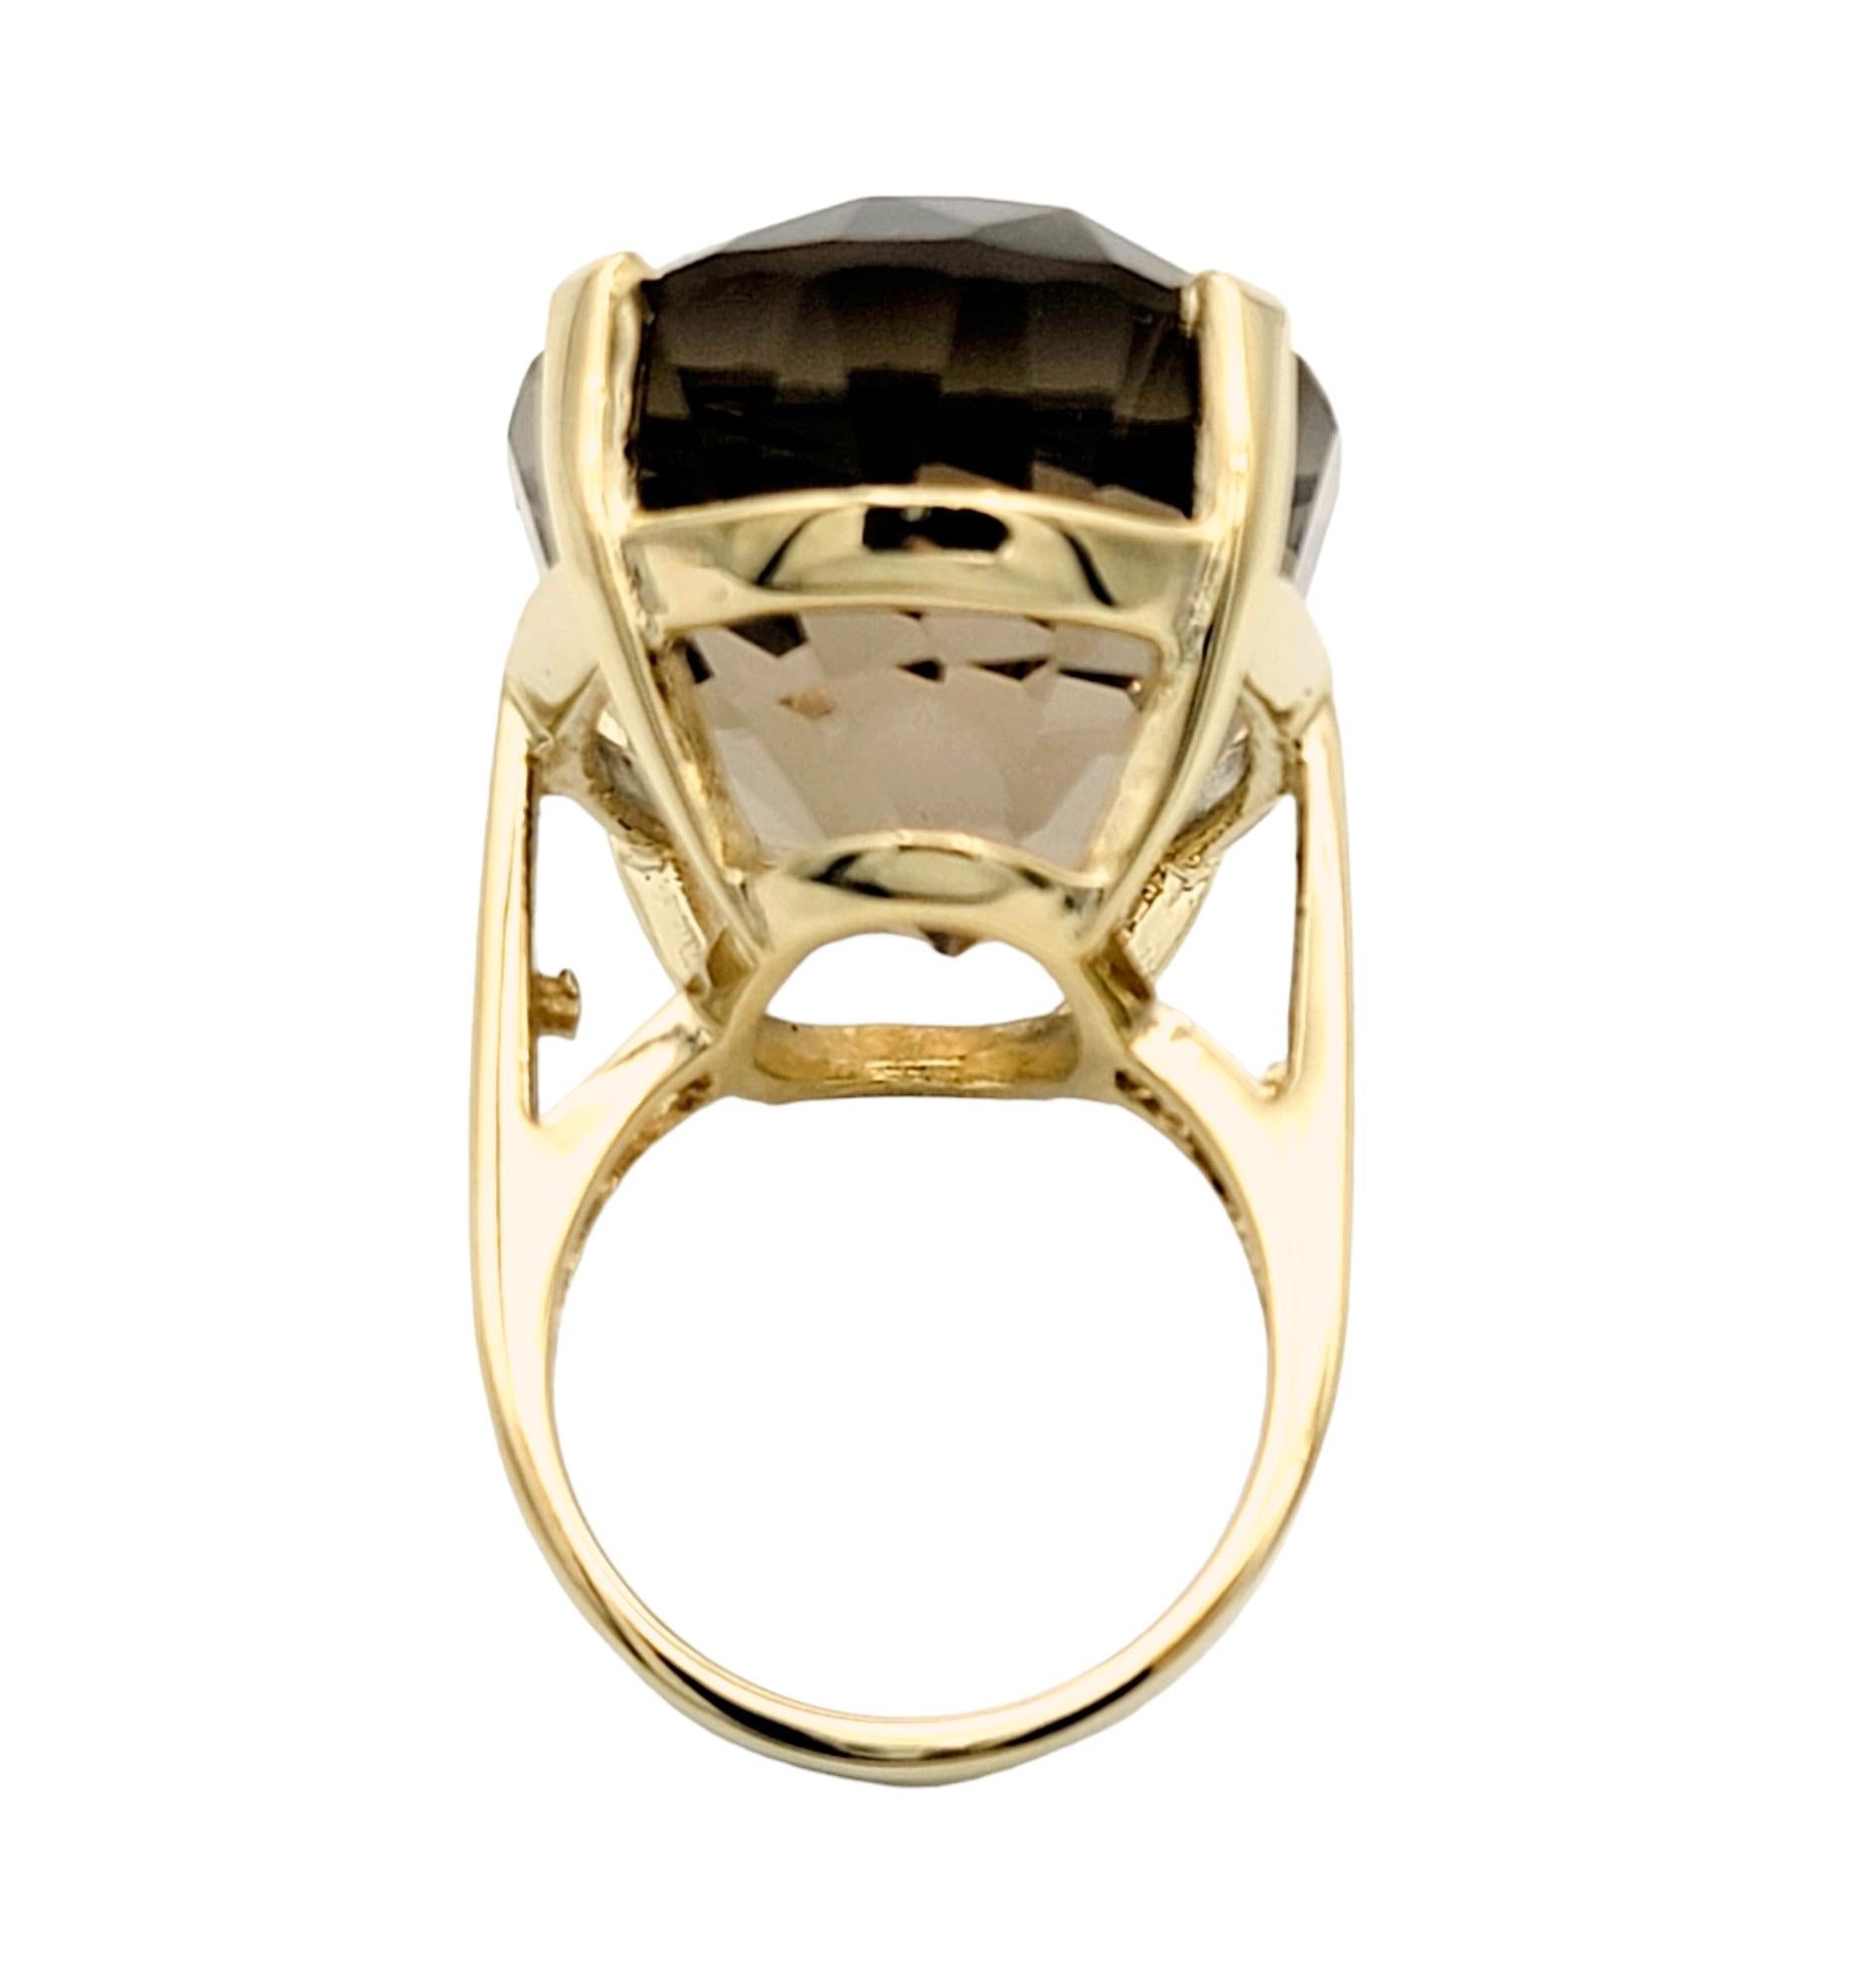 50.71 Carat Oval Cut Smoky Quartz Solitaire 14 Karat Yellow Gold Cocktail Ring For Sale 1